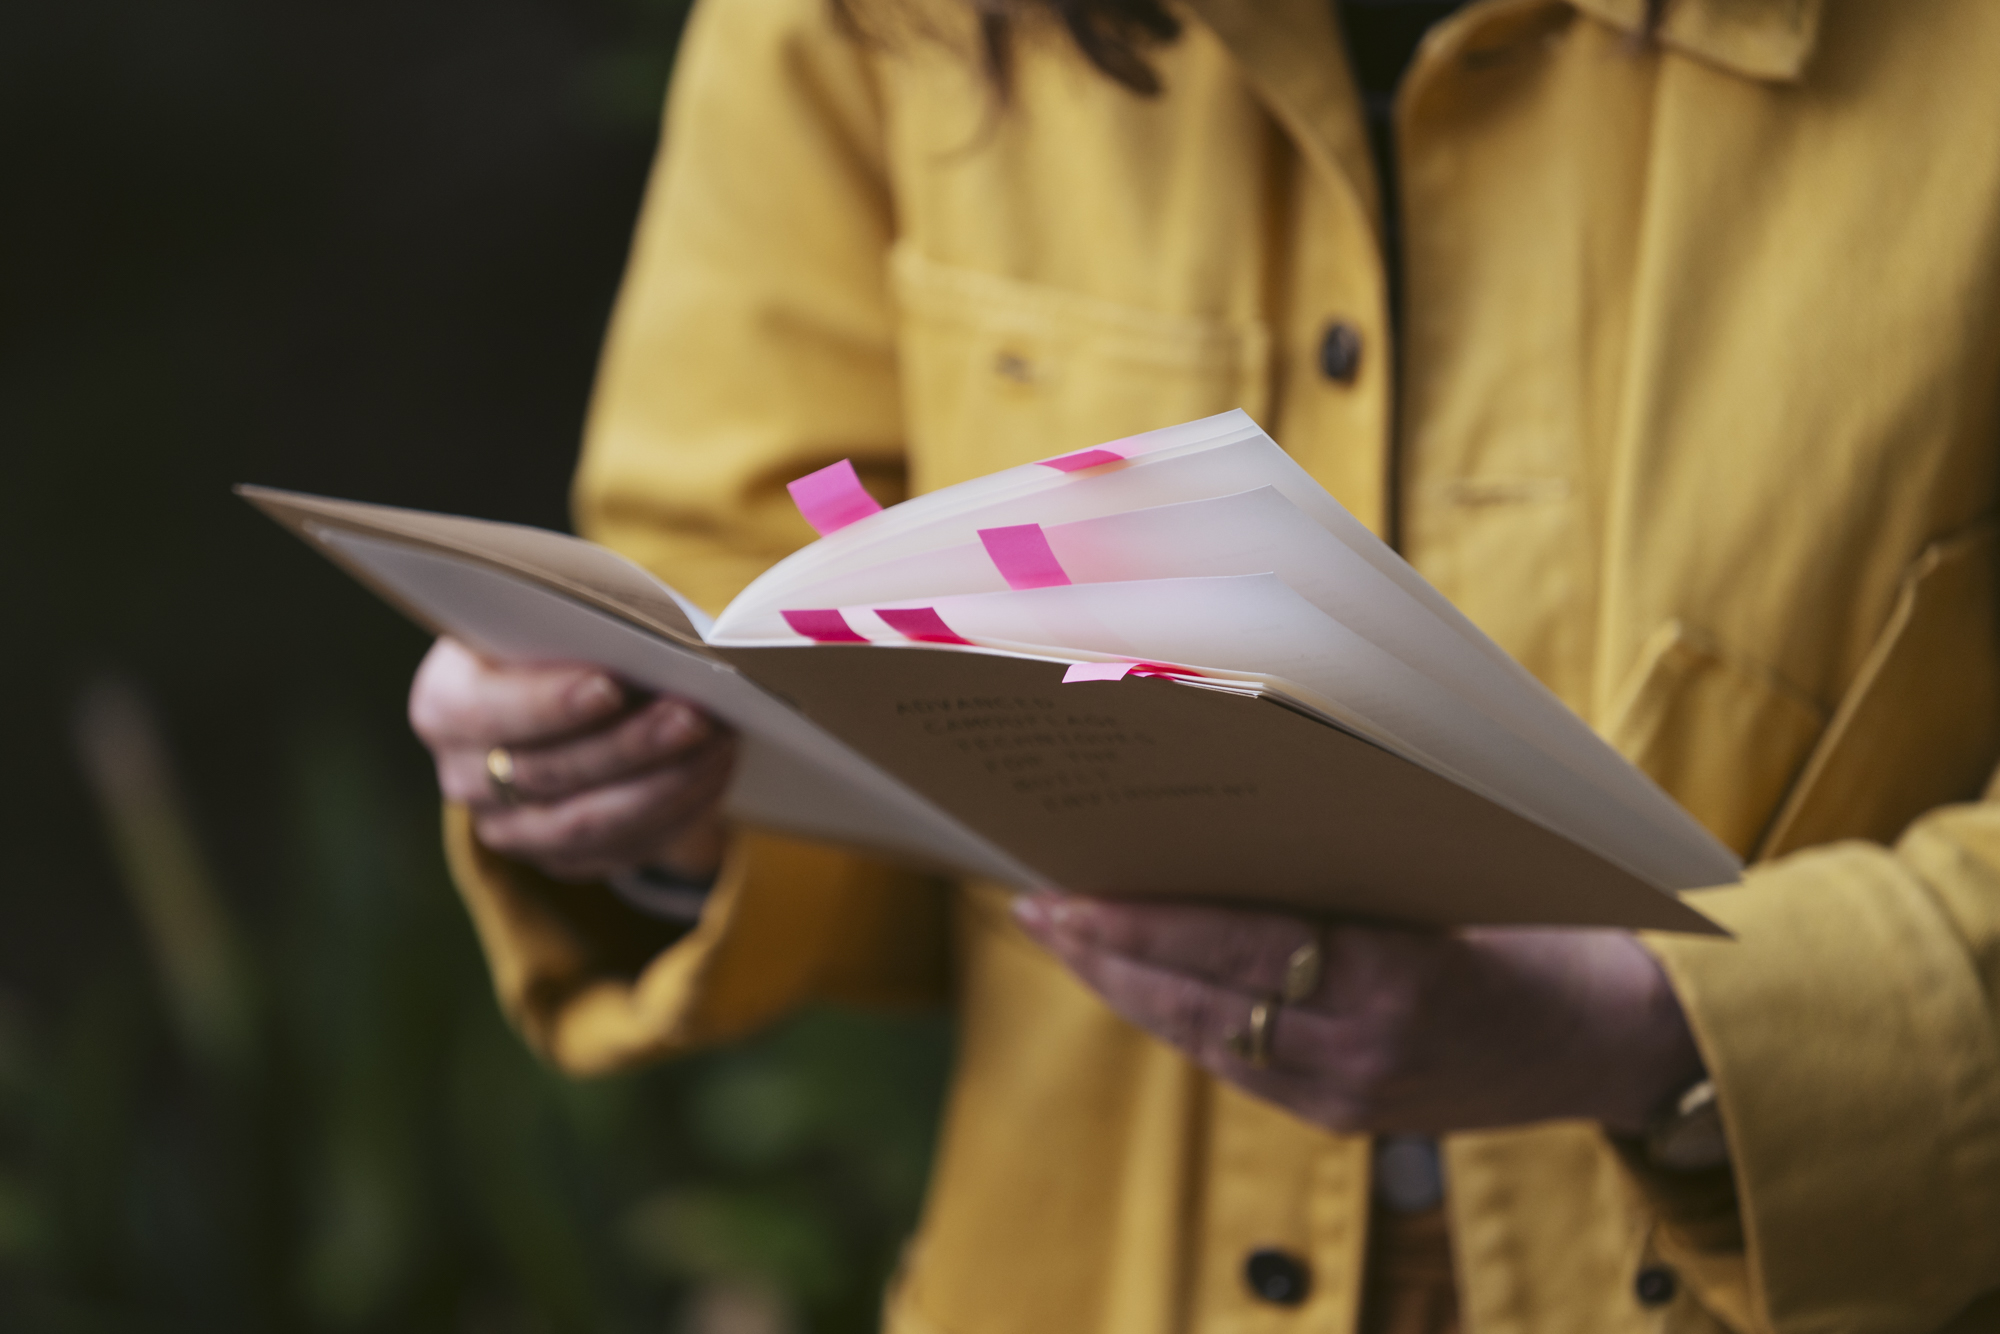 A person holds a thin book marked with pink tabs.